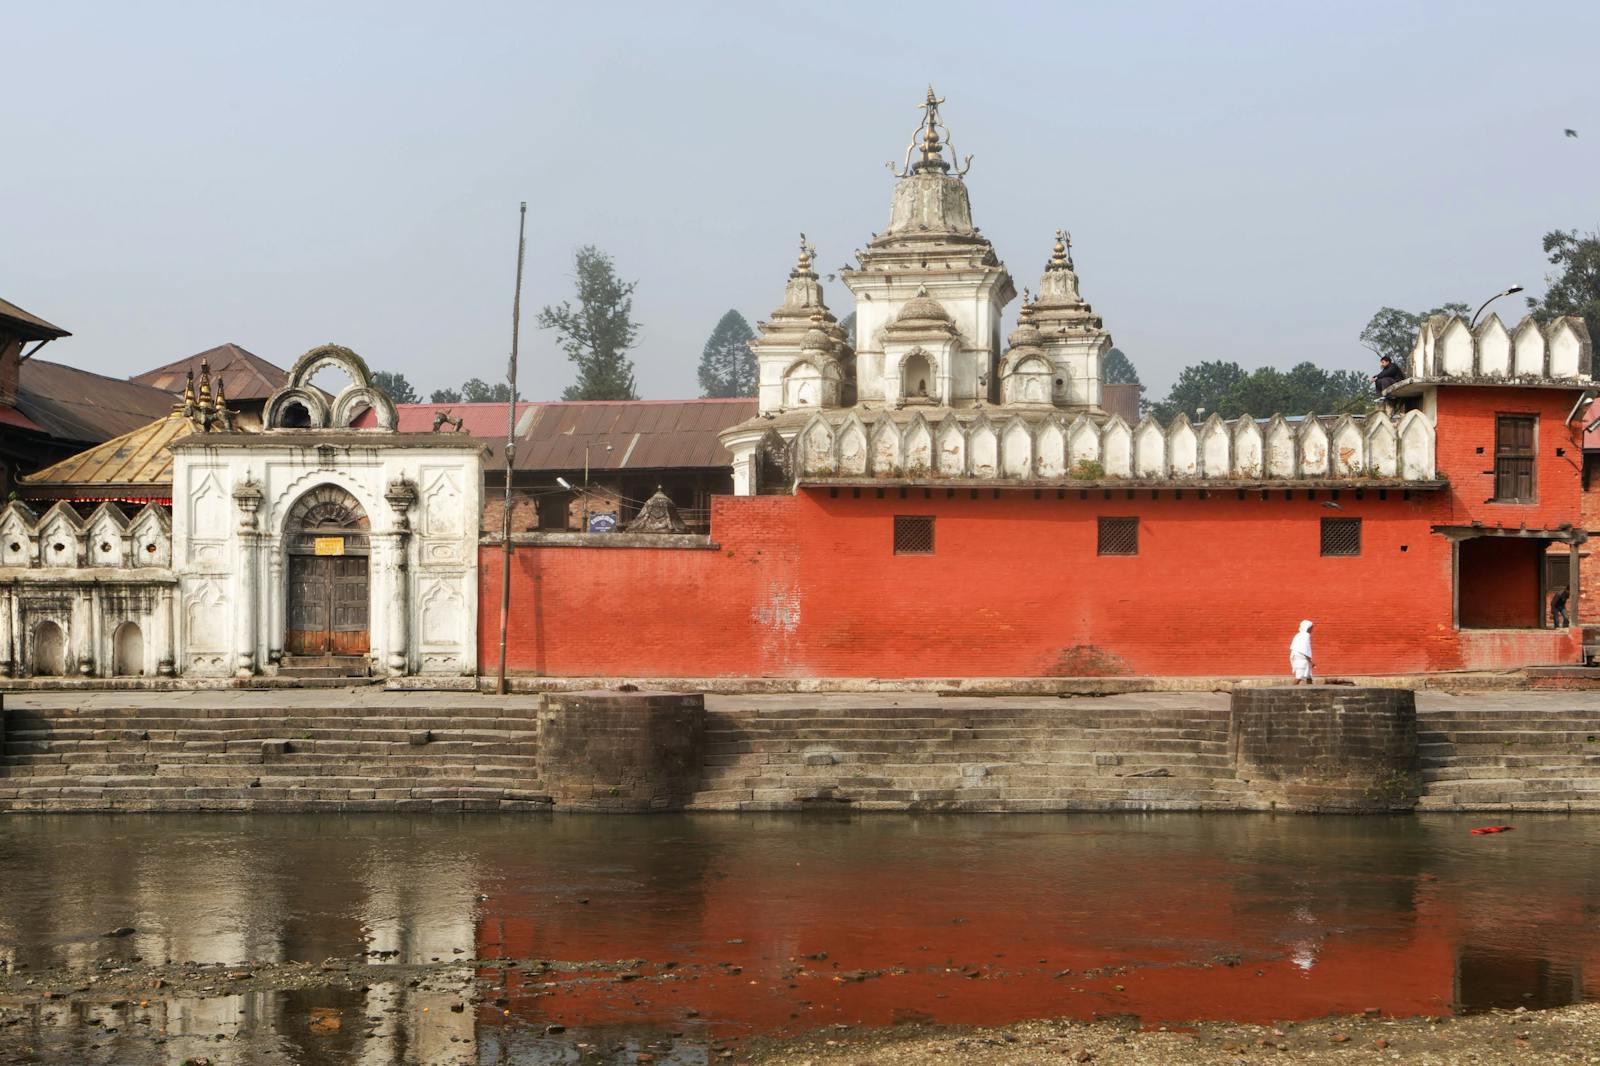 View of the Pashupatinath Temple From the Riverside